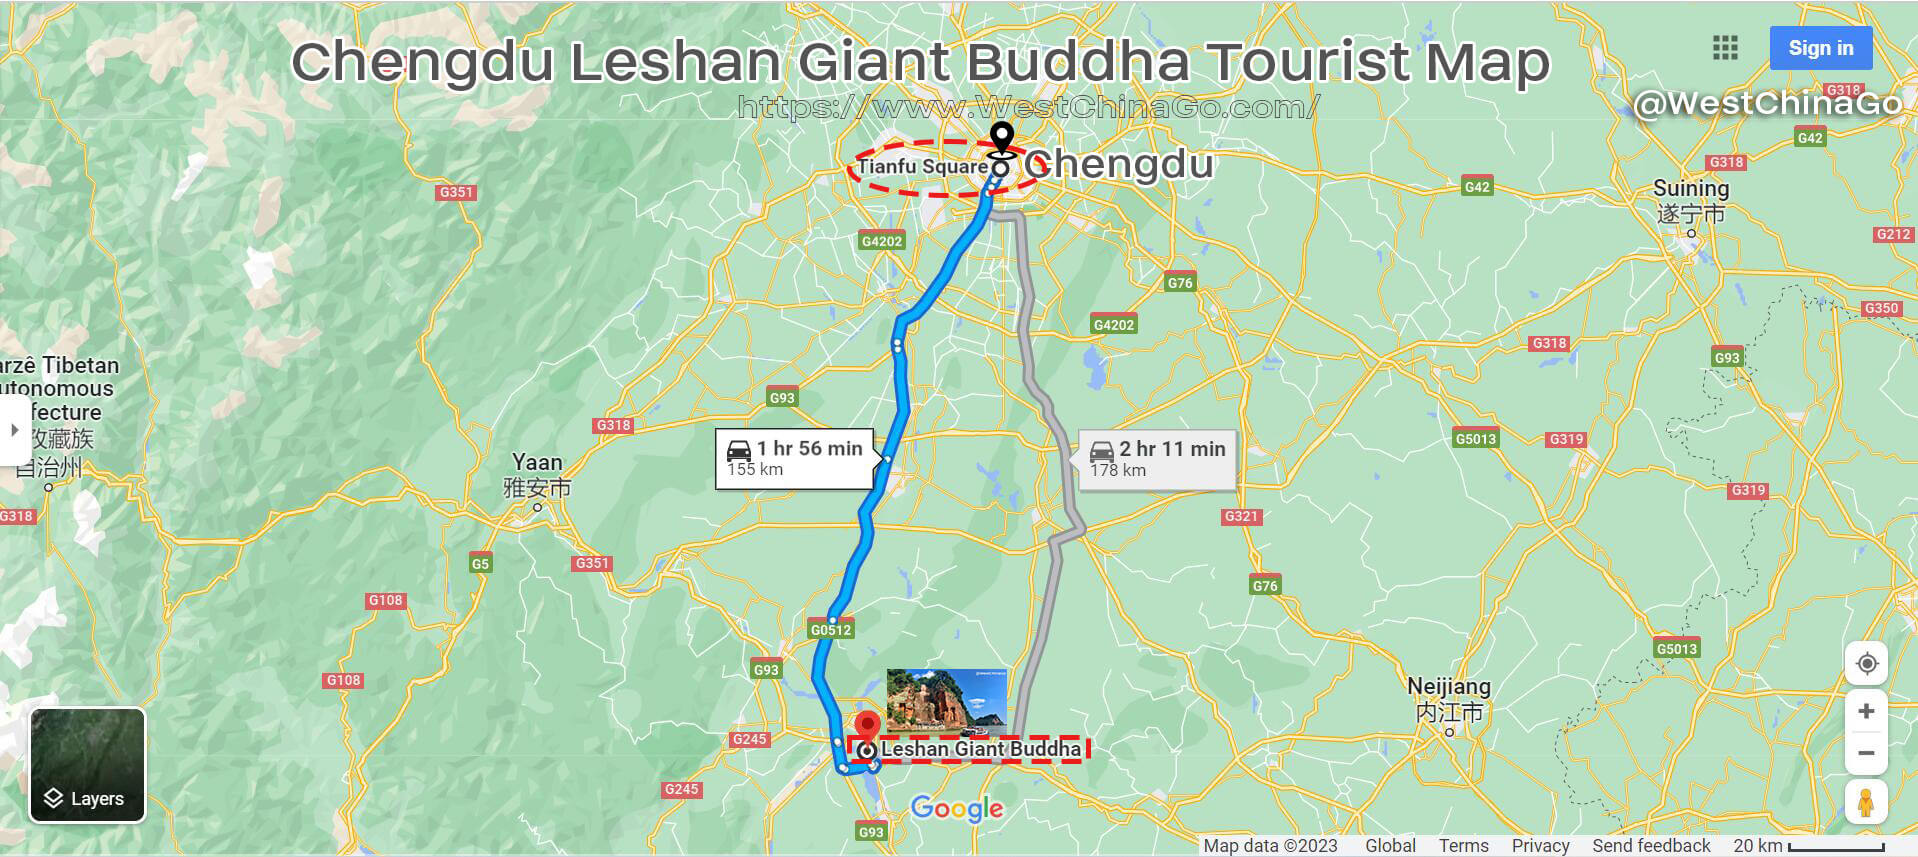 How to get to emeishan from Leshan Giant Buddha